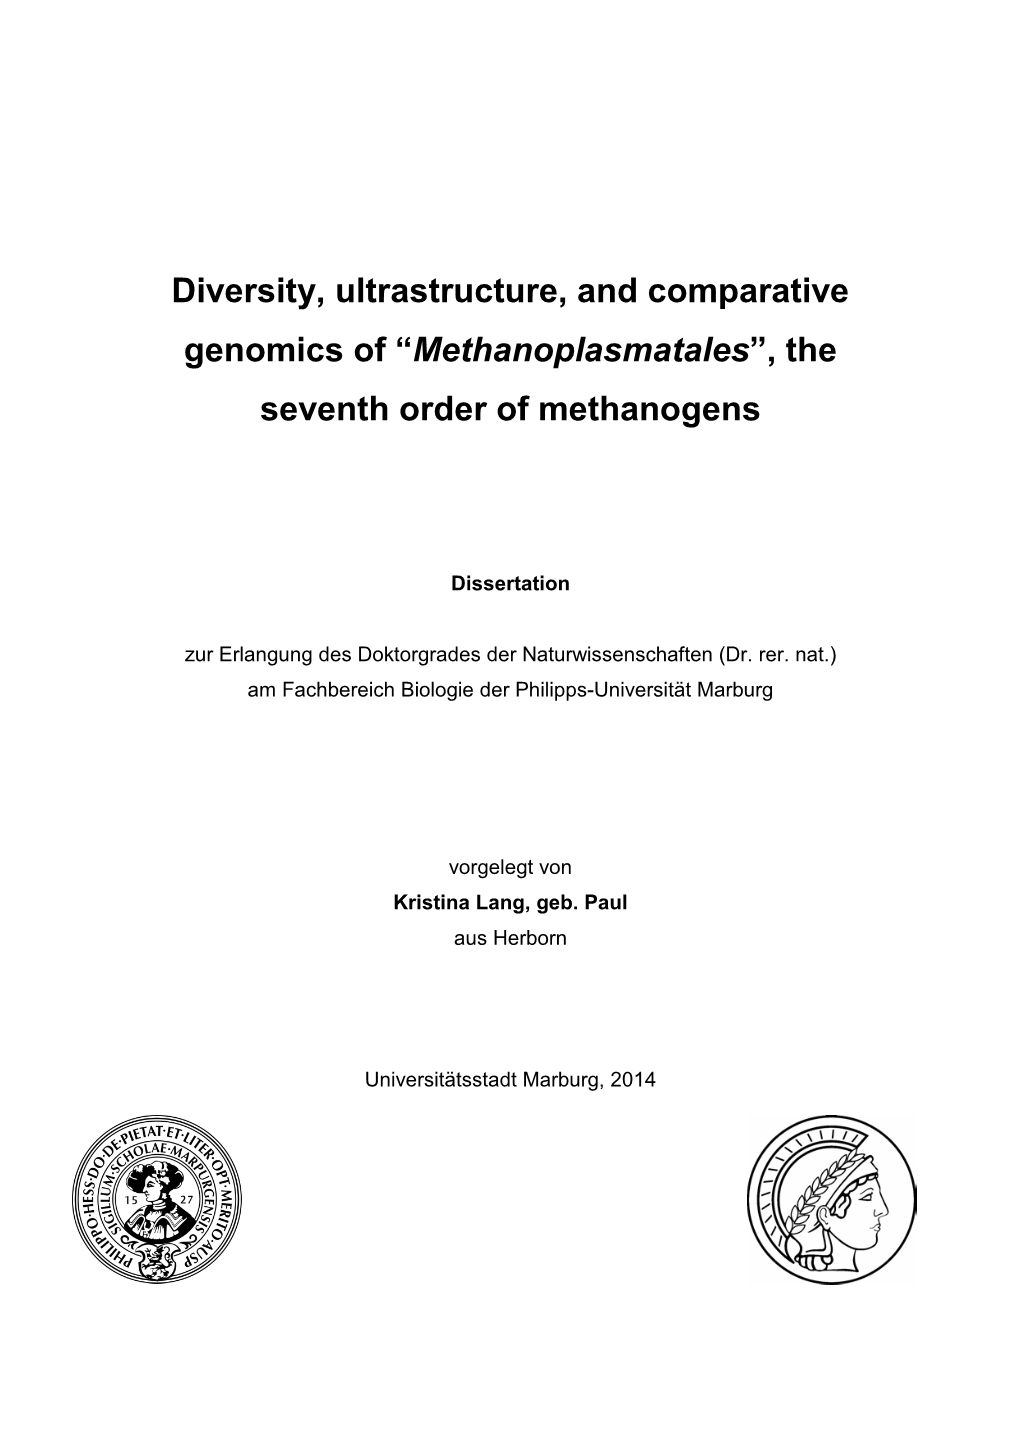 Diversity, Ultrastructure, and Comparative Genomics of “Methanoplasmatales”, the Seventh Order of Methanogens